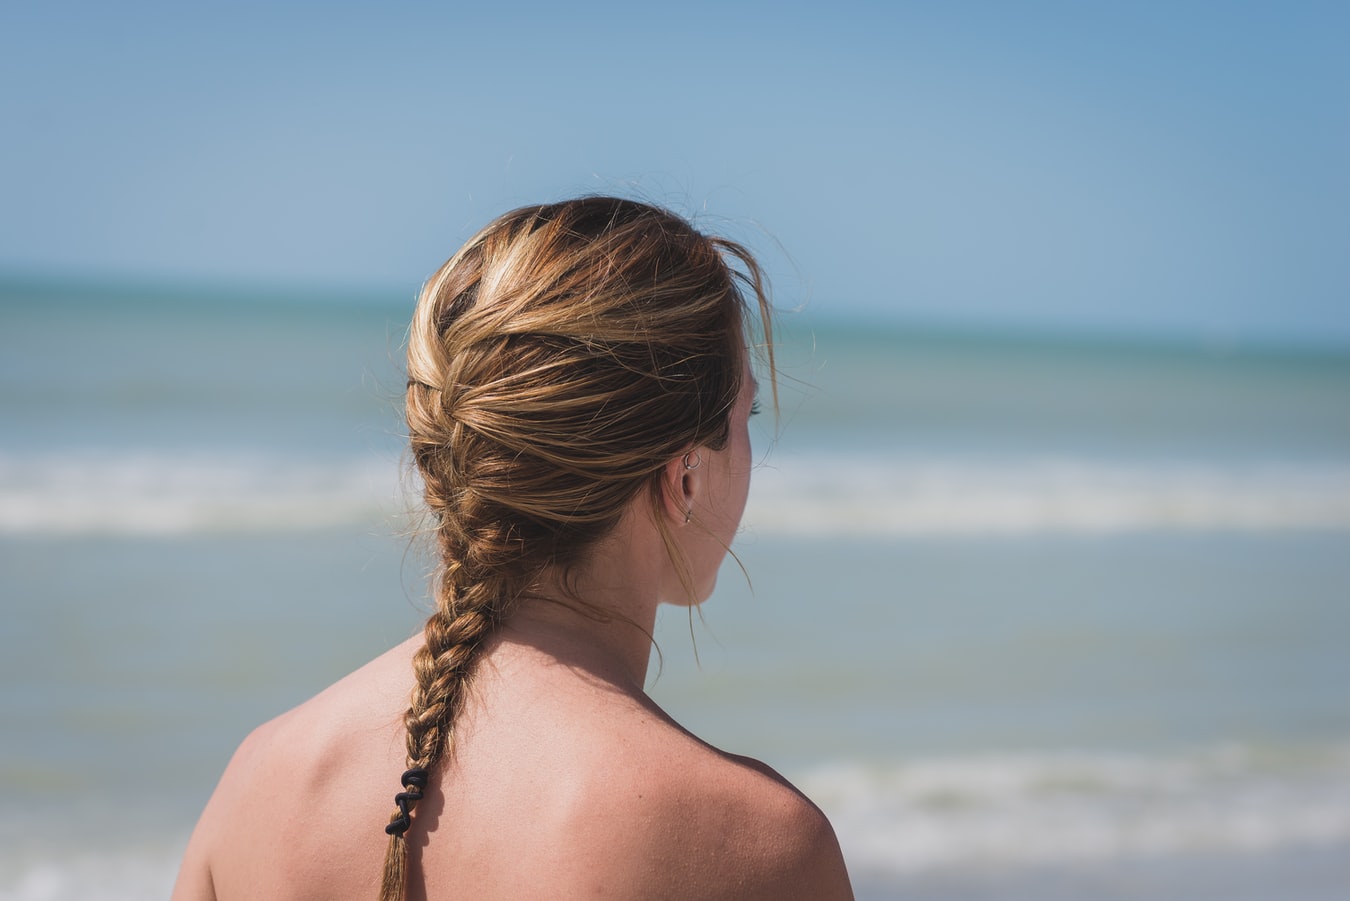 How to French braid your own hair